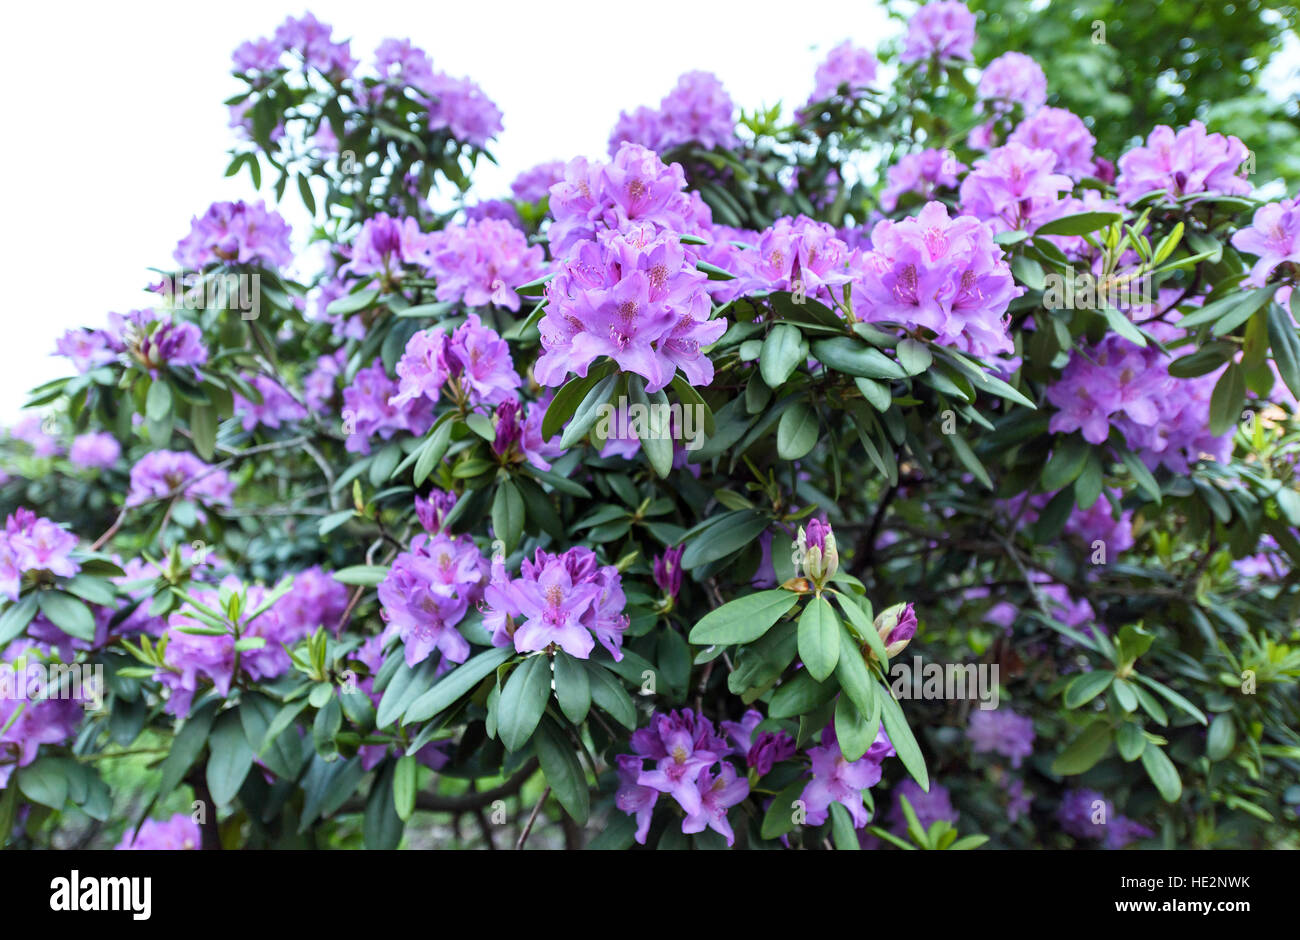 Photo of azalea indica happy days evergreen shrub with bright green foliage and purple violet blooming flowers Stock Photo